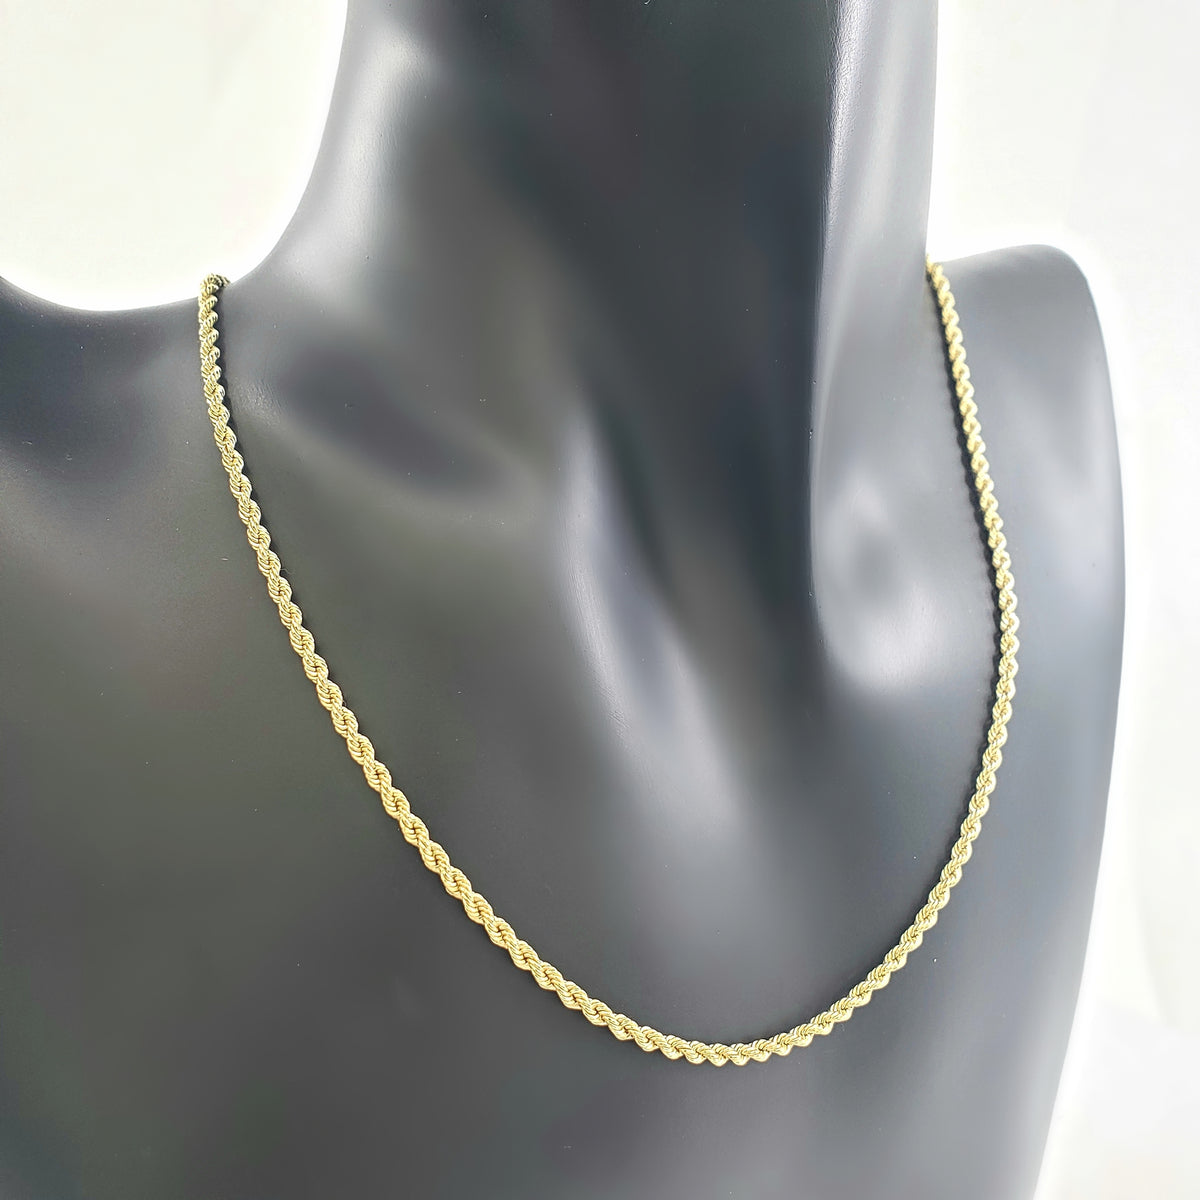 10K Yellow Gold 2.15mm Hollow Rope Chain with Spring Clasp - 22 Inches